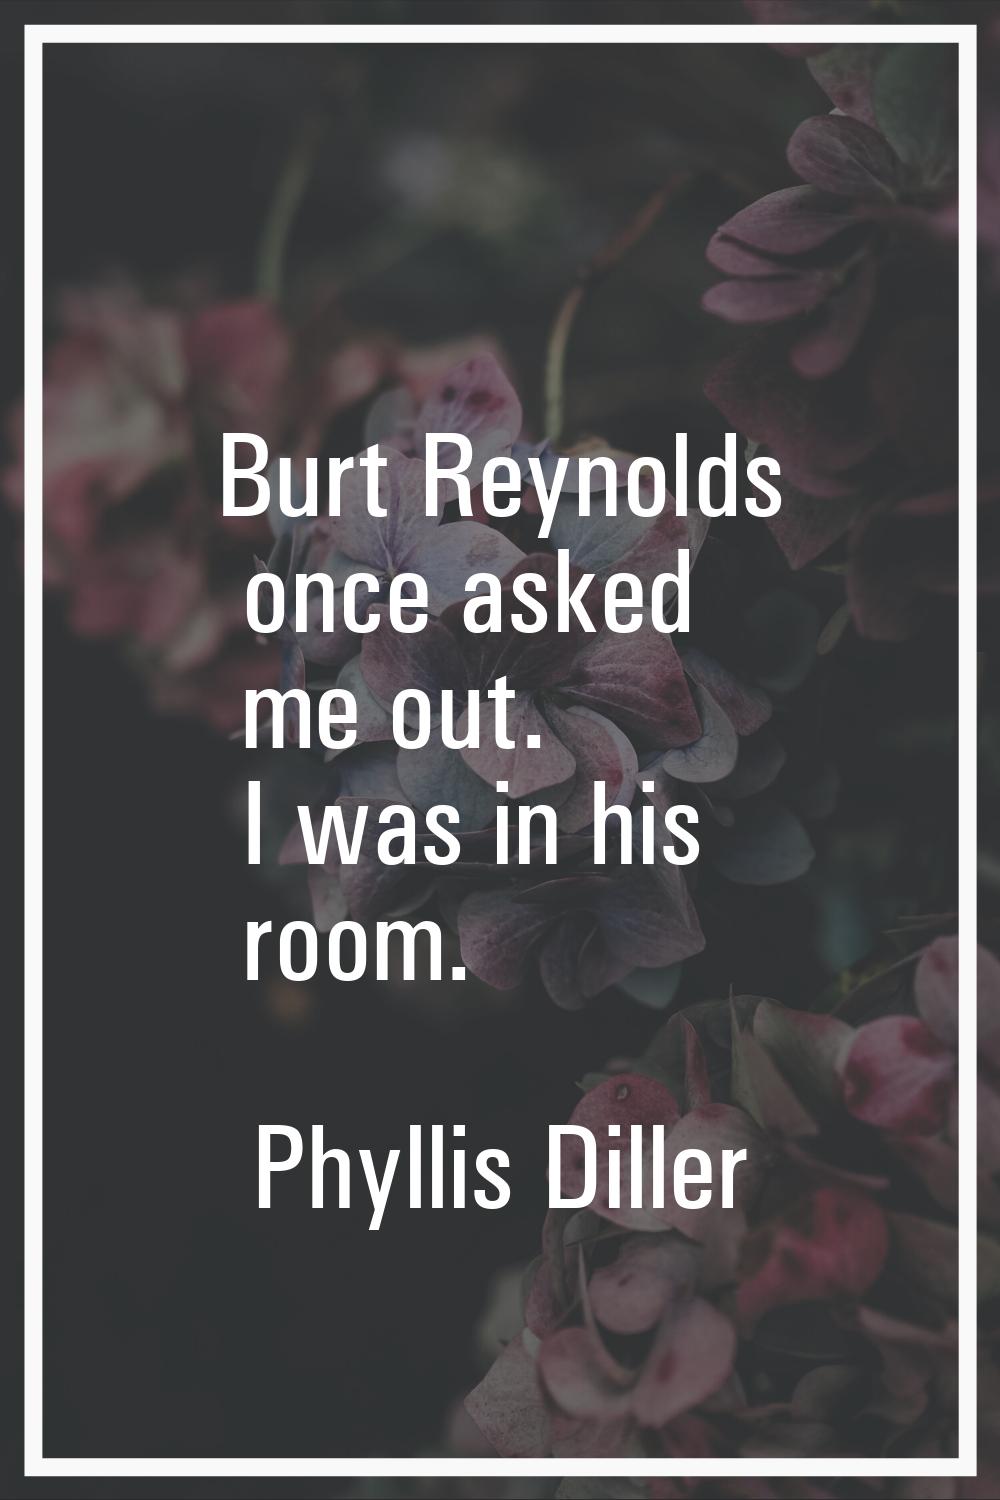 Burt Reynolds once asked me out. I was in his room.